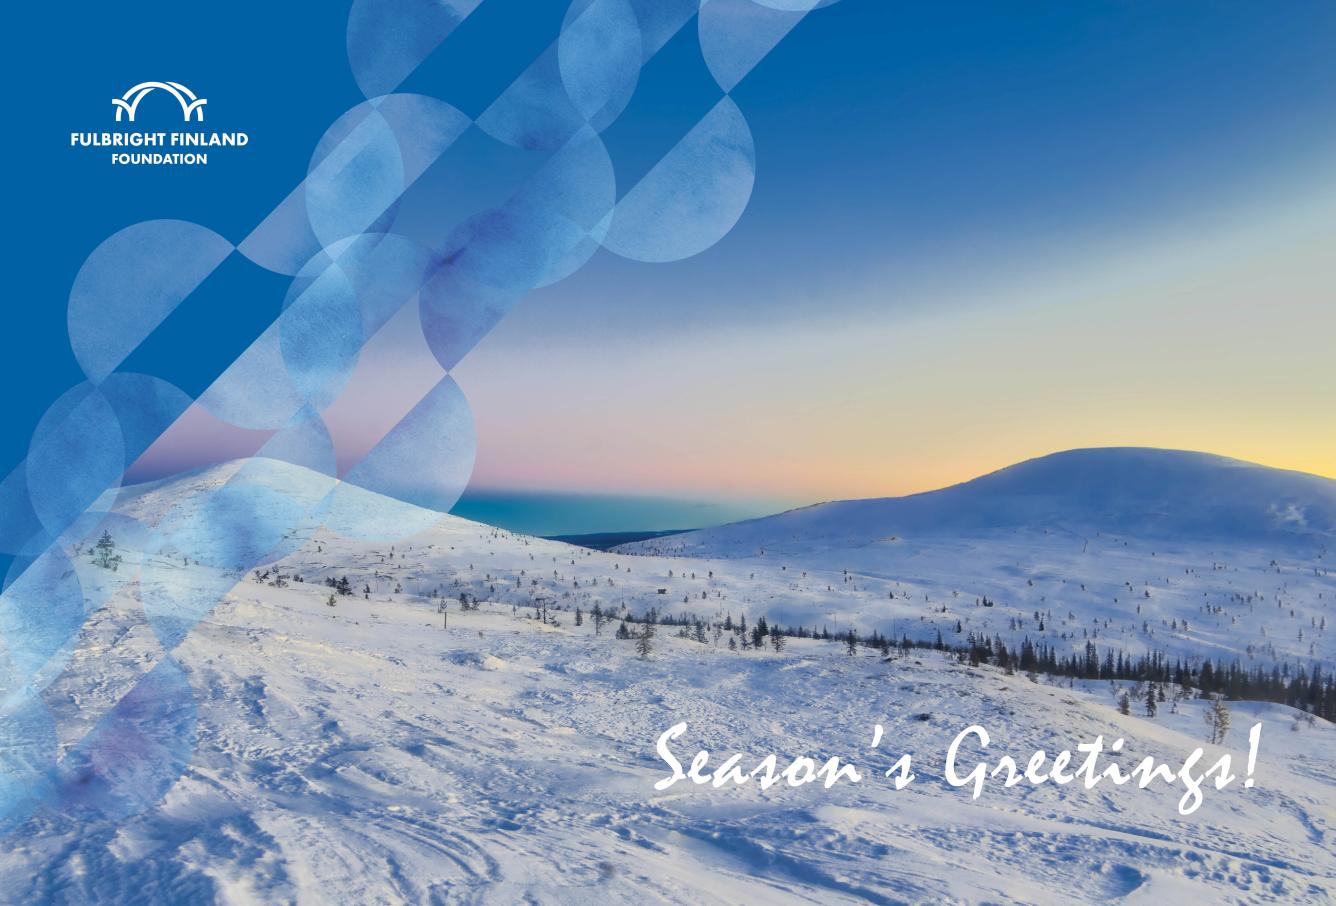 Scene with two fells and a colorful sunset behind them. There is a lot of snow on the ground. On the left corner of the photo there is a white Fulbright Finland Foundation logo on a dark blue background, and next to it the wave pattern of the Foundation.